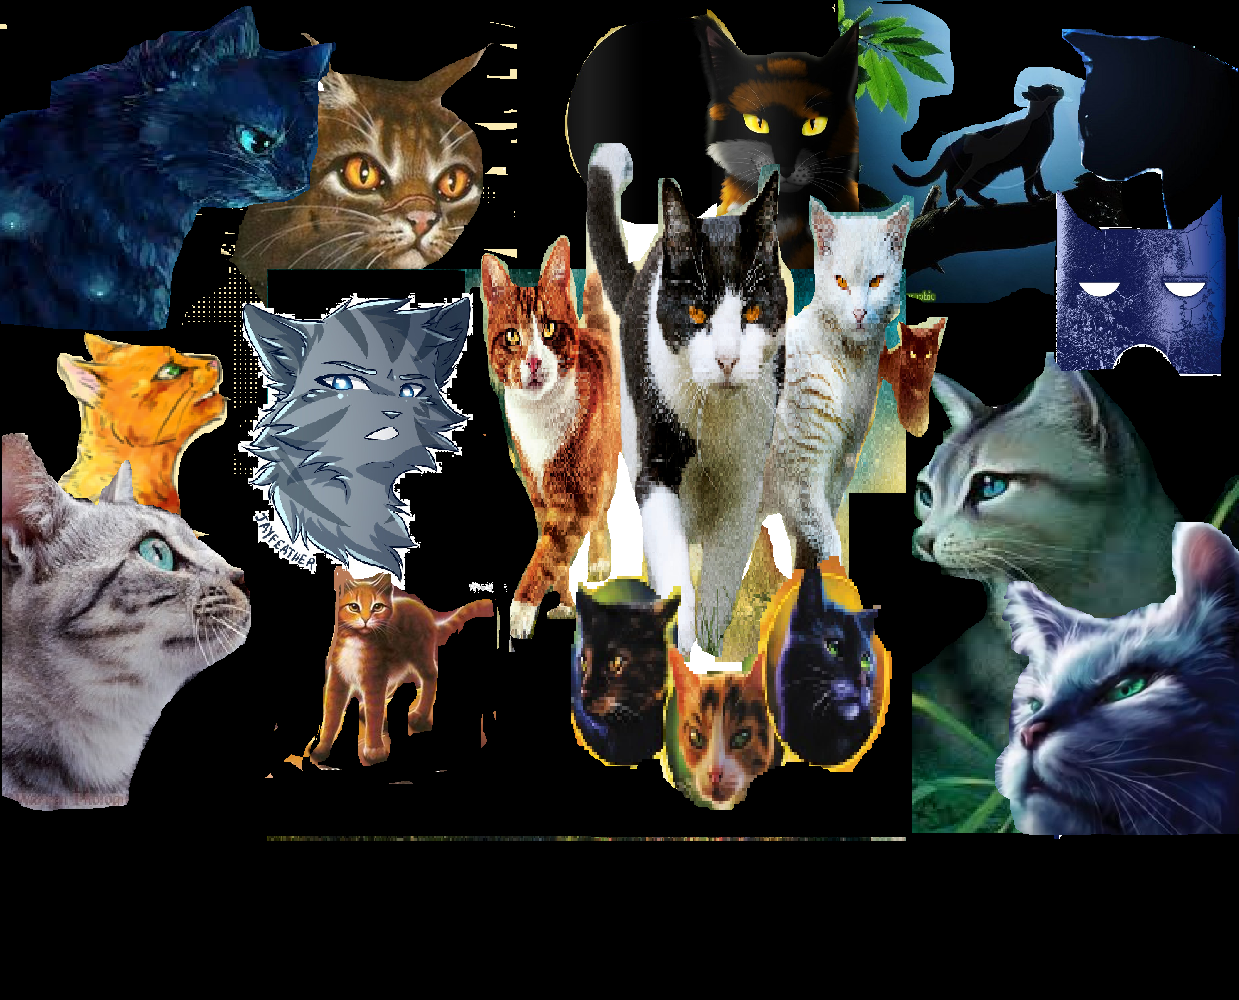 My Warrior Cats Poster[made this myself!]